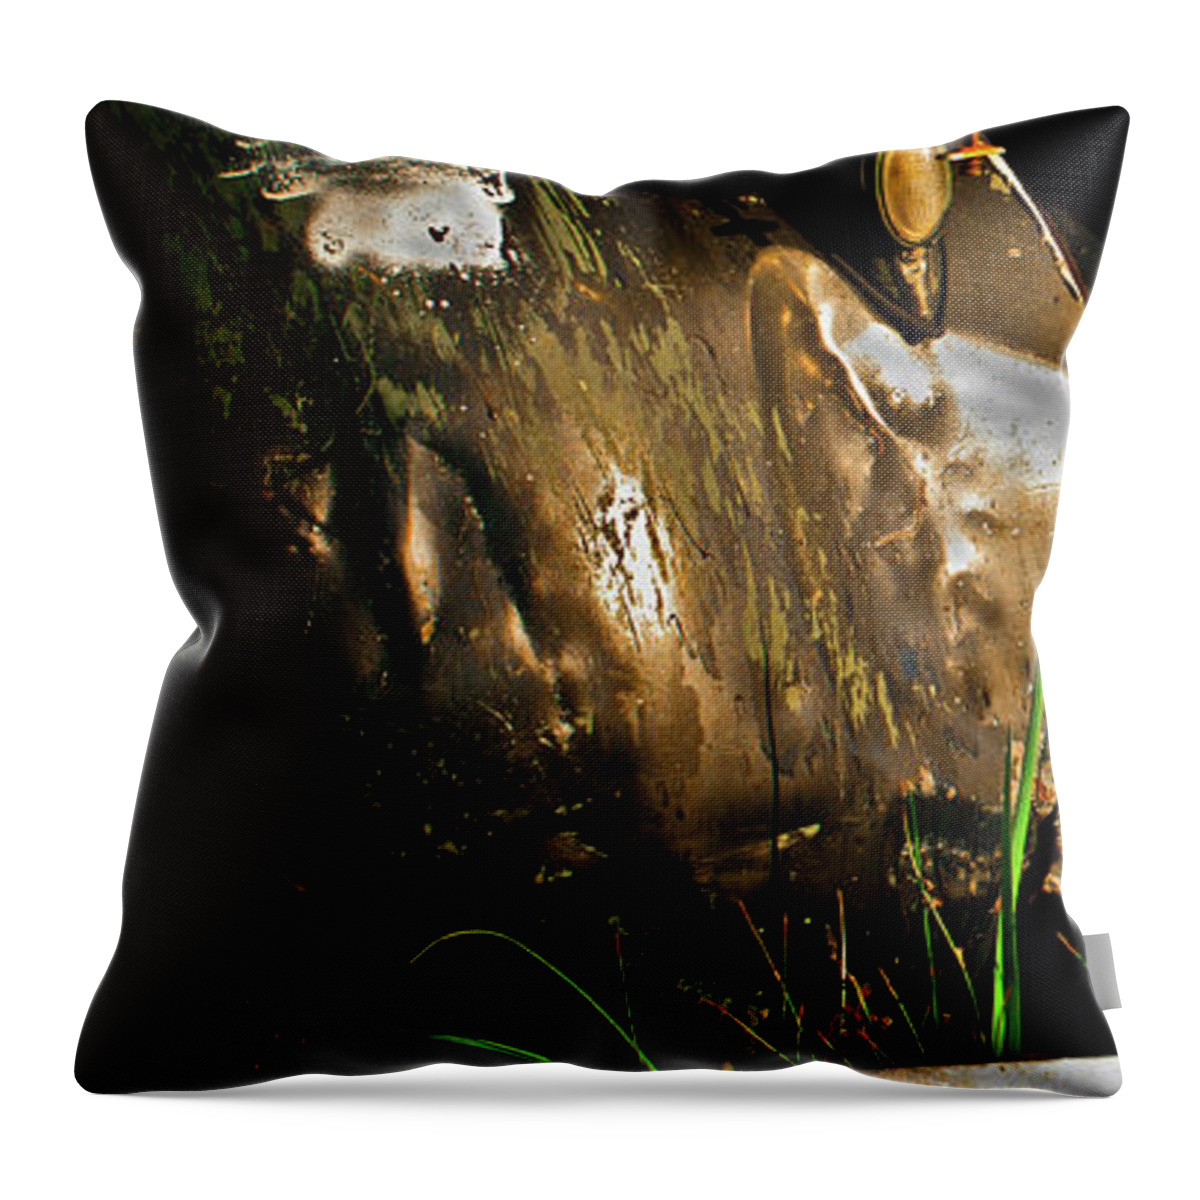 Rusty Truck Throw Pillow featuring the photograph Bodie 14 by Catherine Sobredo